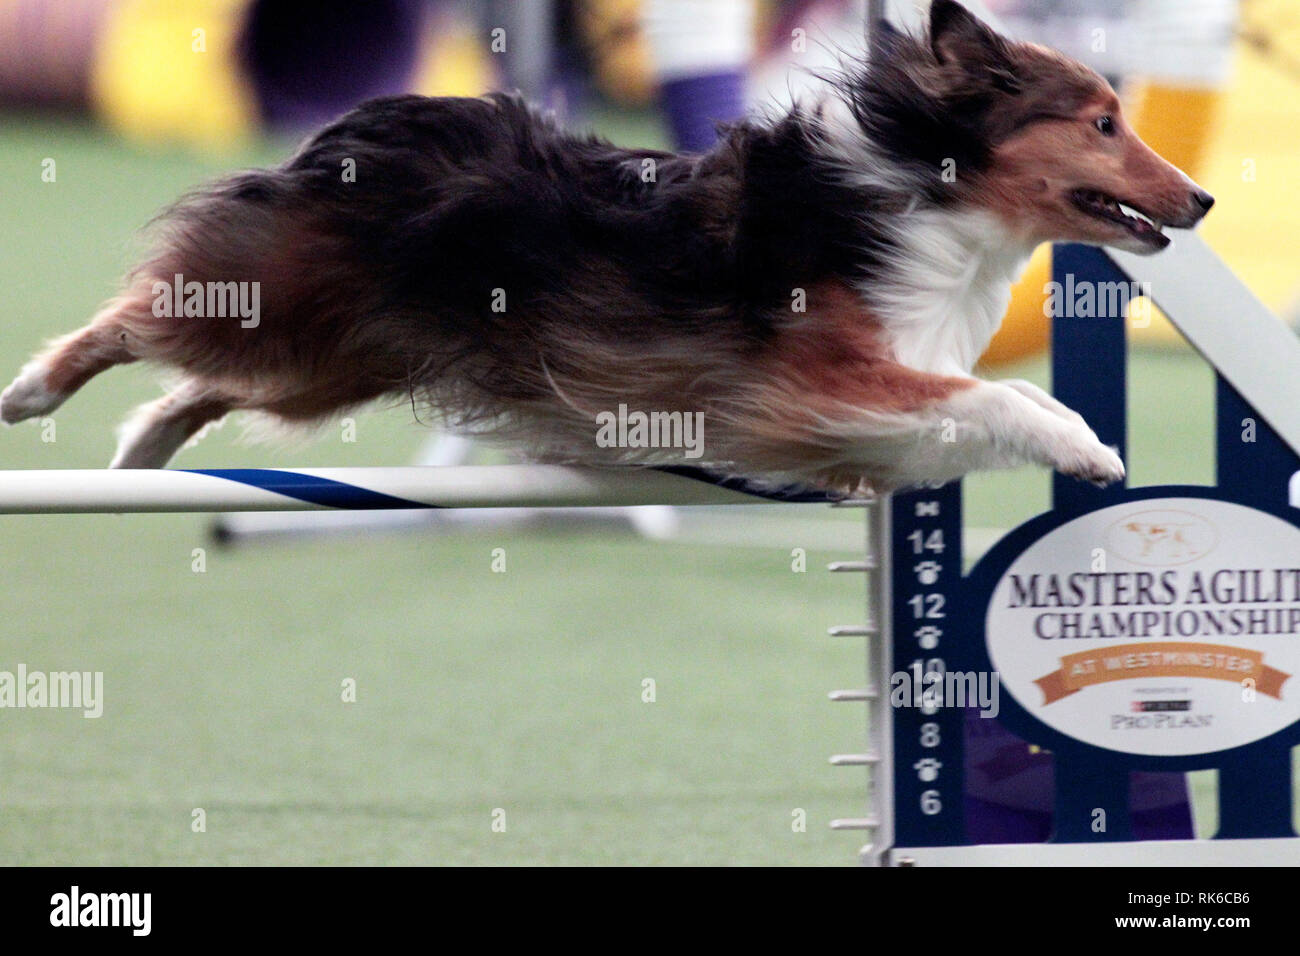 New York, USA. 09th Feb, 2019. Westminster Dog Show - Speedo, a Shetland Sheepdog, competing in the preliminaries of the Westminster Kennel Club's Master's Agility Championship. Credit: Adam Stoltman/Alamy Live News Stock Photo